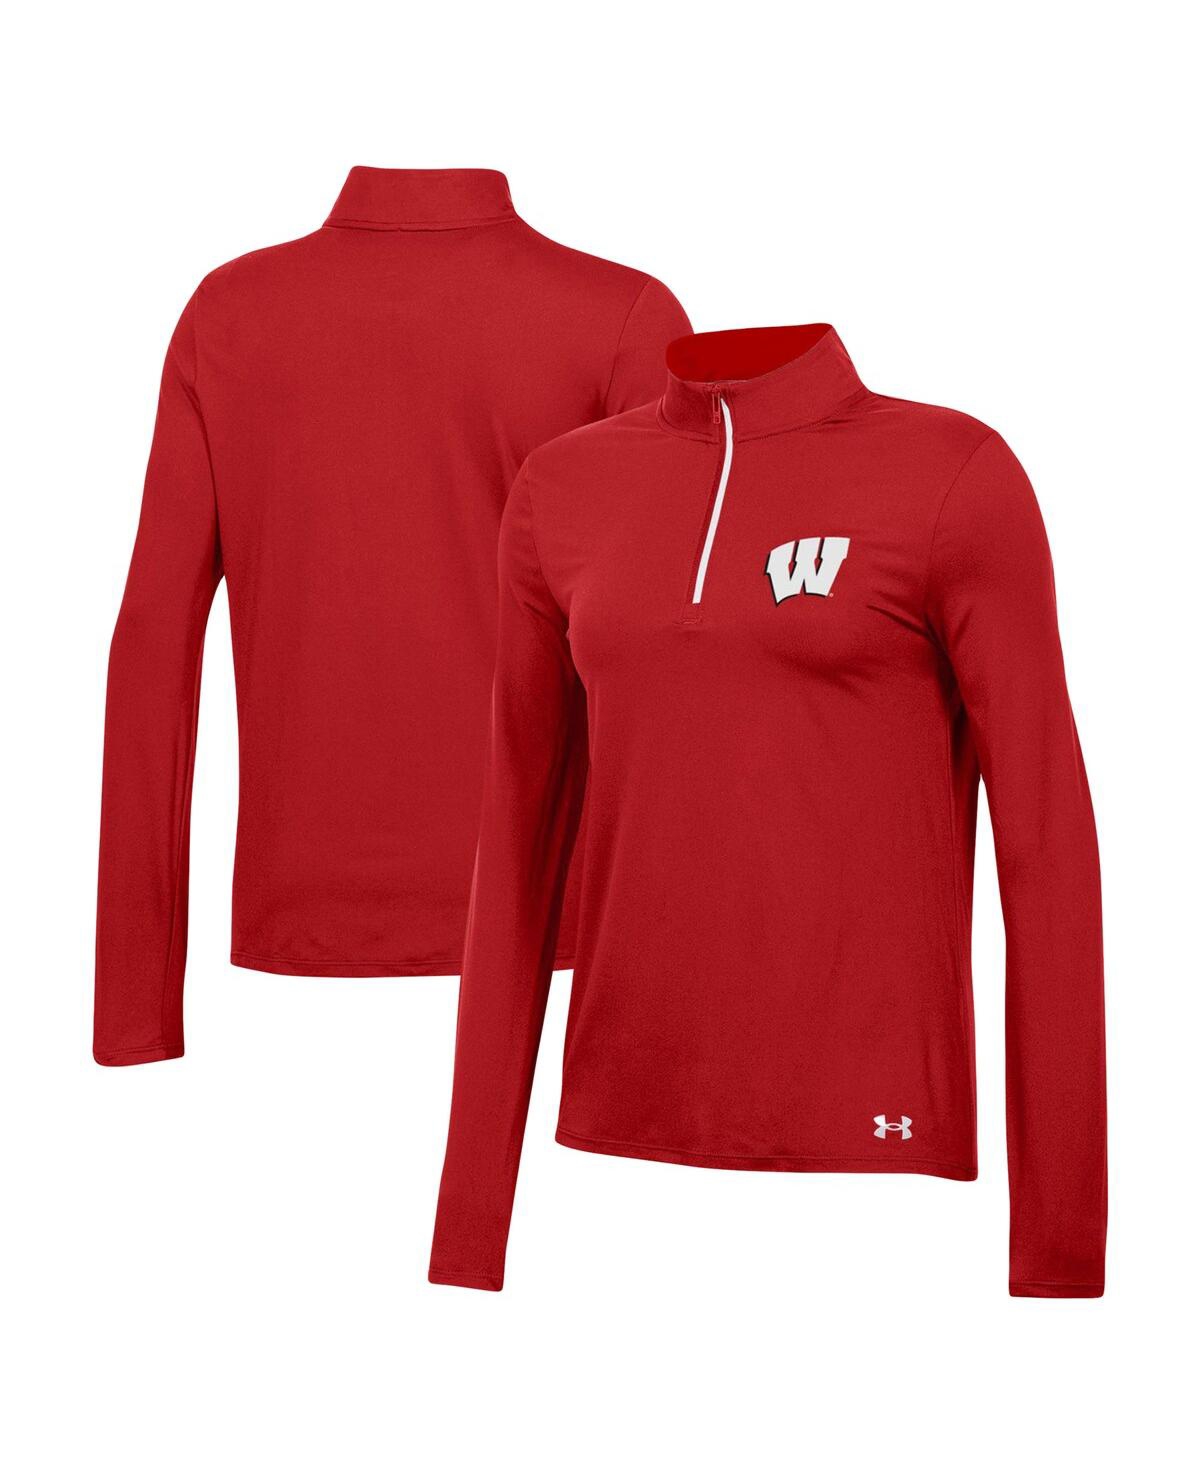 Under Armour Women's  Red Wisconsin Badgers Gameday Knockout Quarter-zip Top